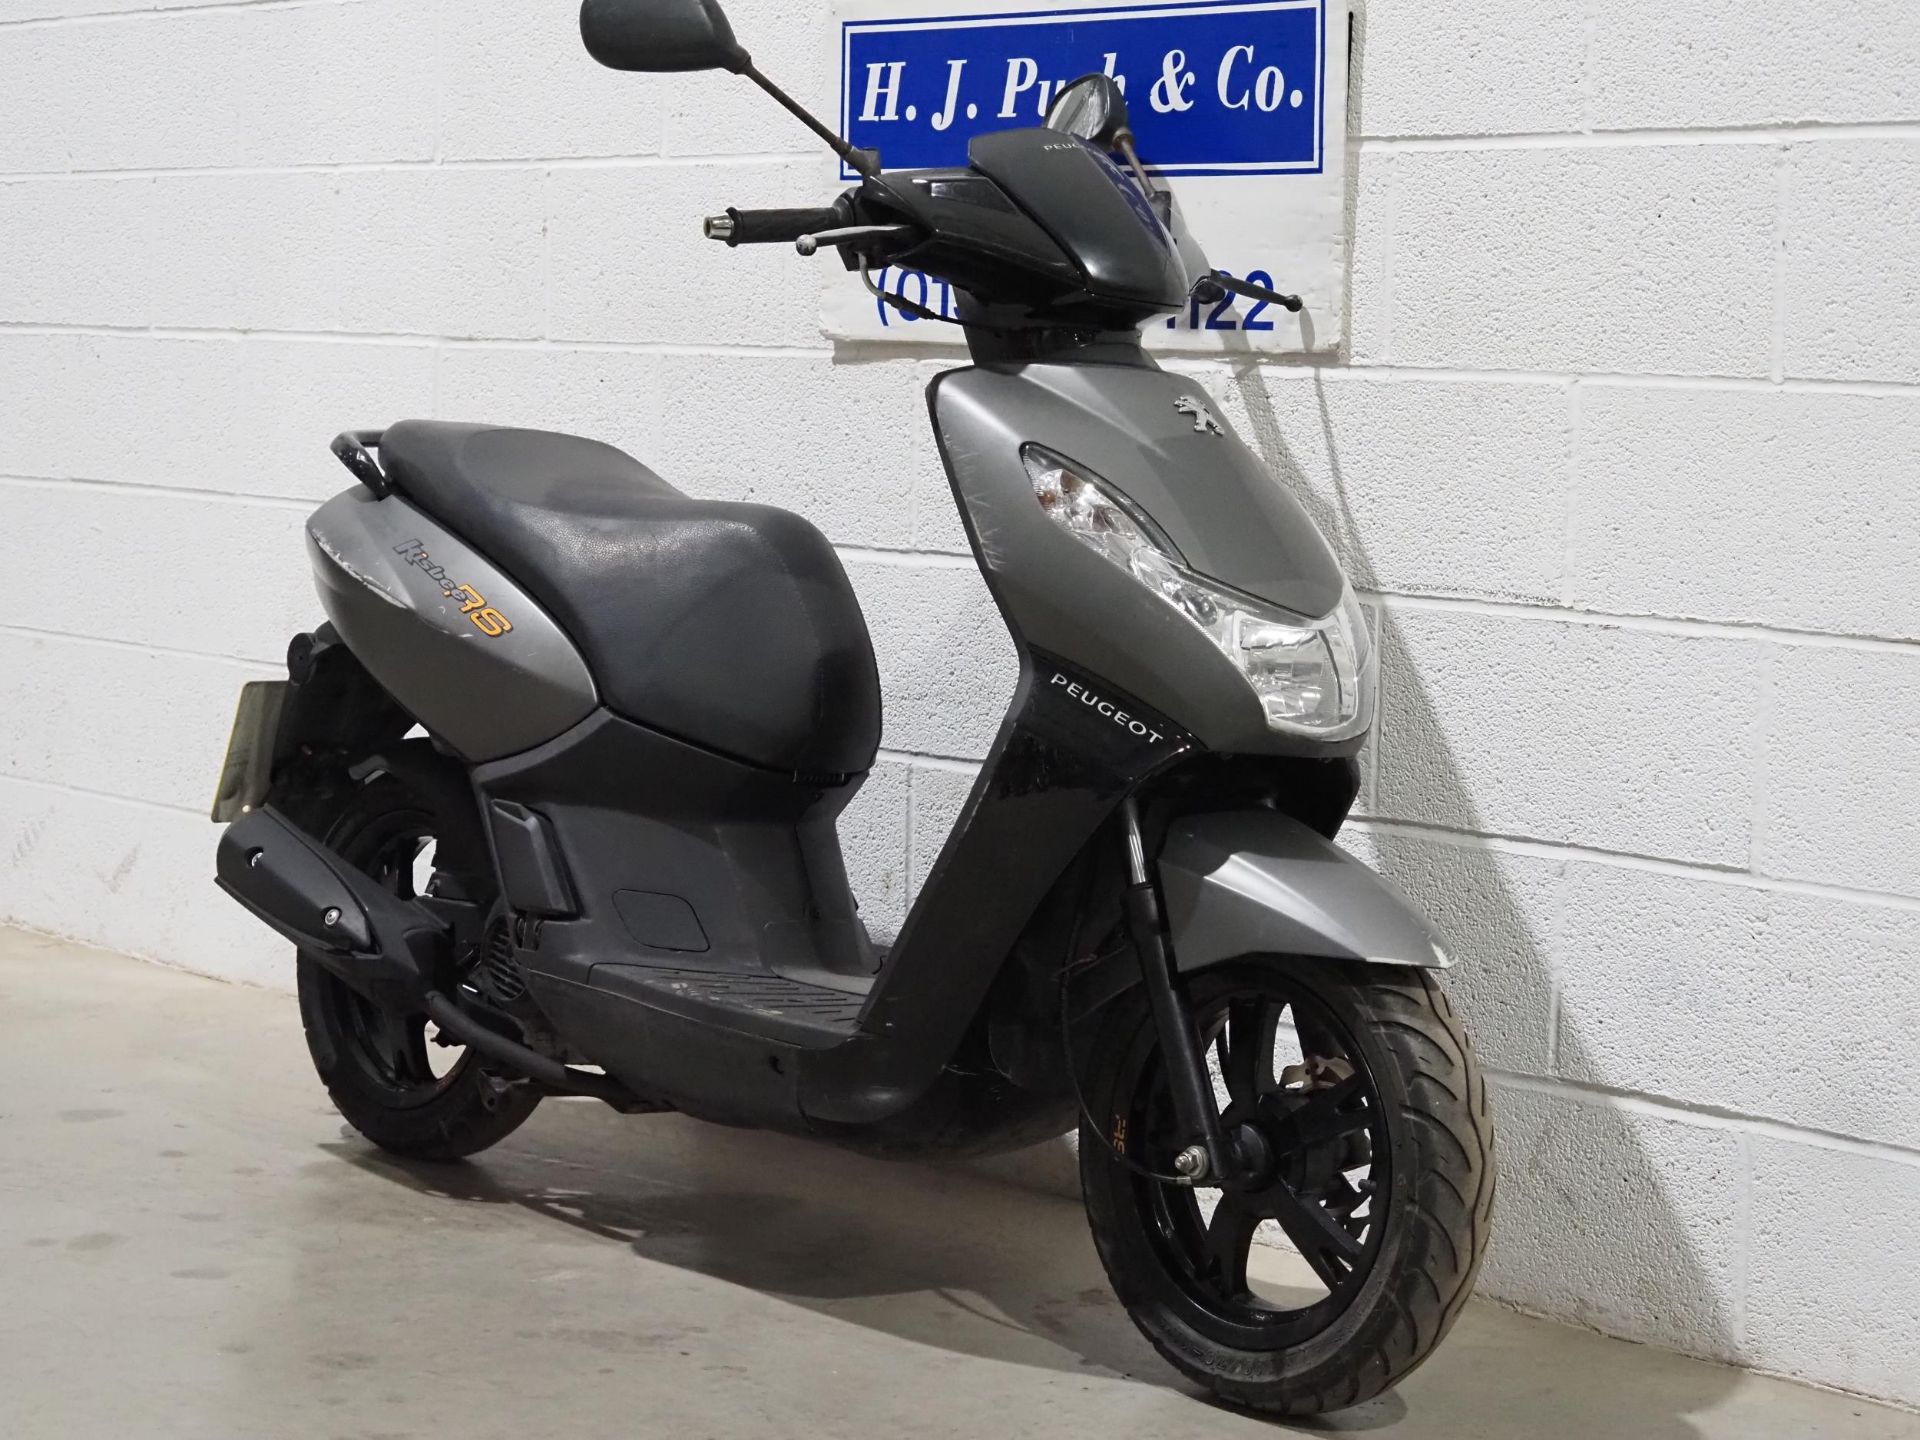 Peugeot Kisbee 50 moped. 2015. 49cc. Last ran in February. HPI clear and comes with MOT test - Image 2 of 6